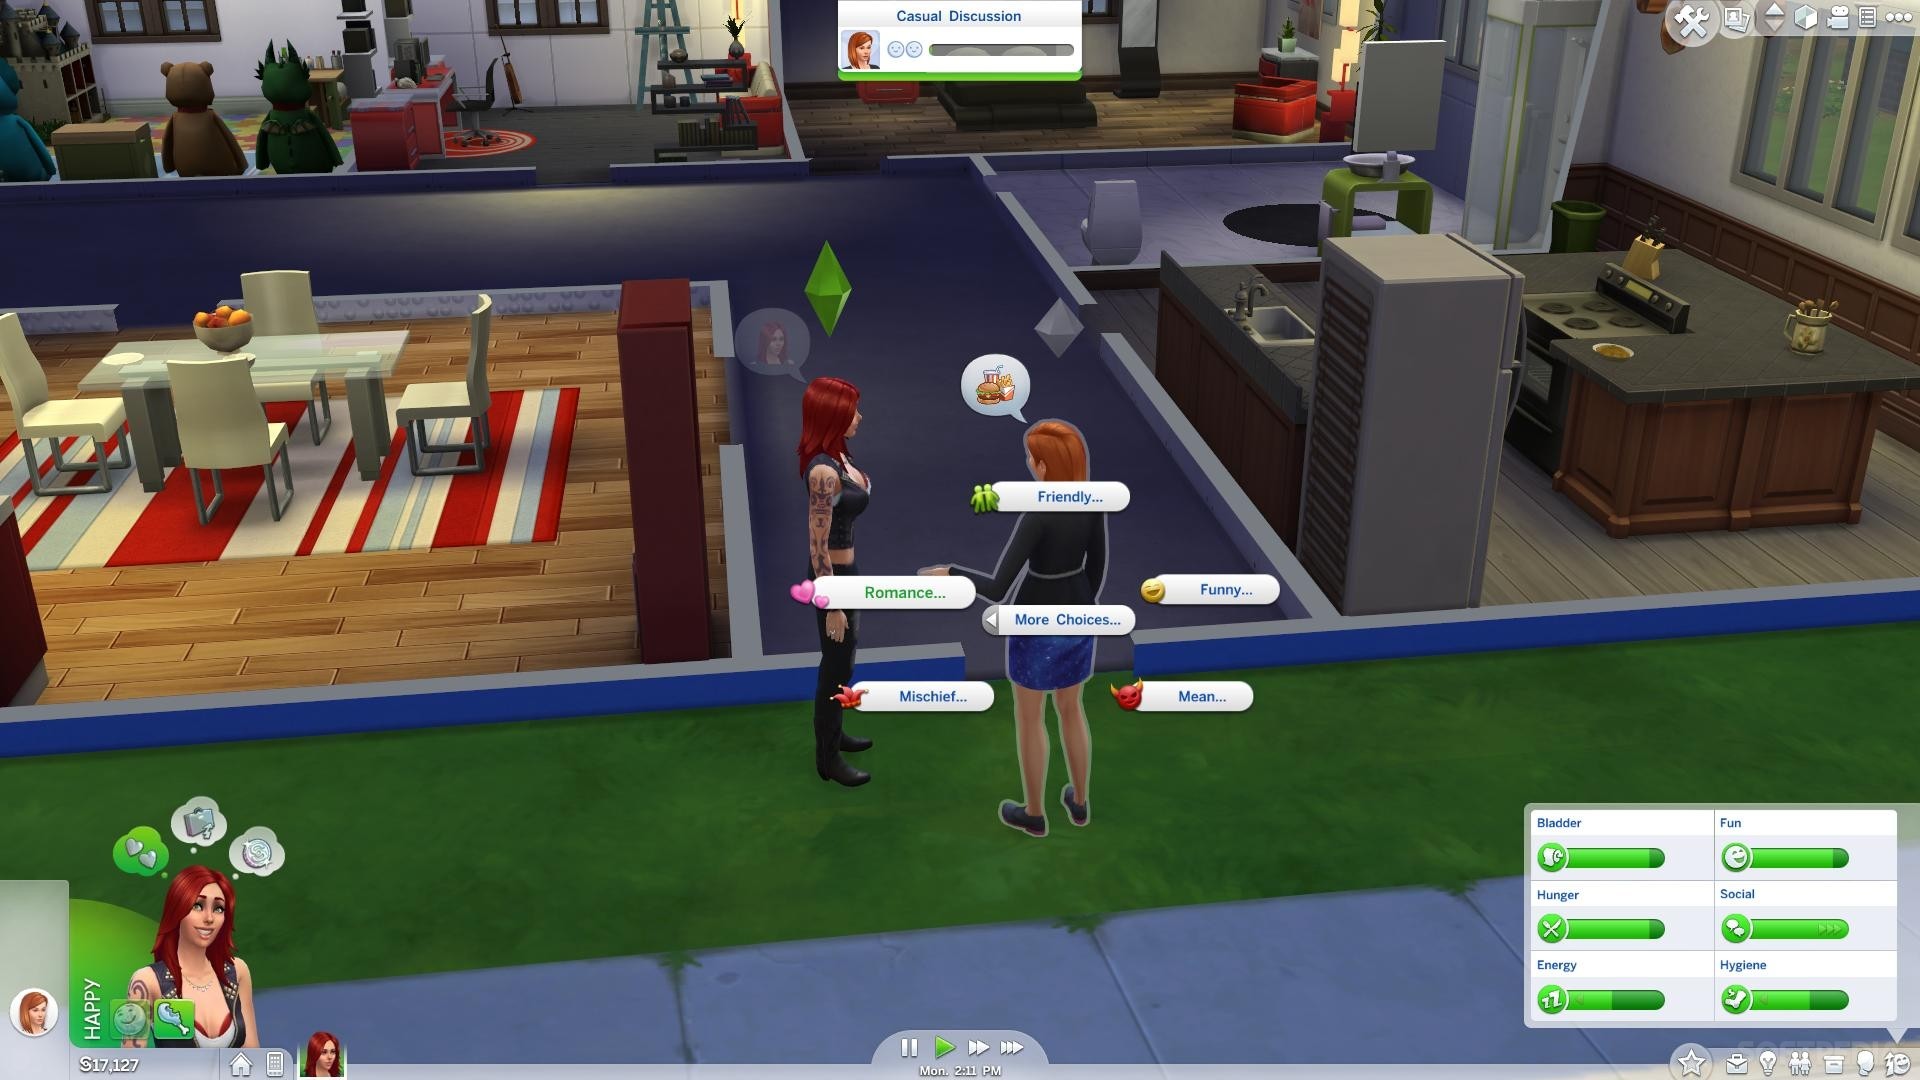 sims 4 apk download for pc